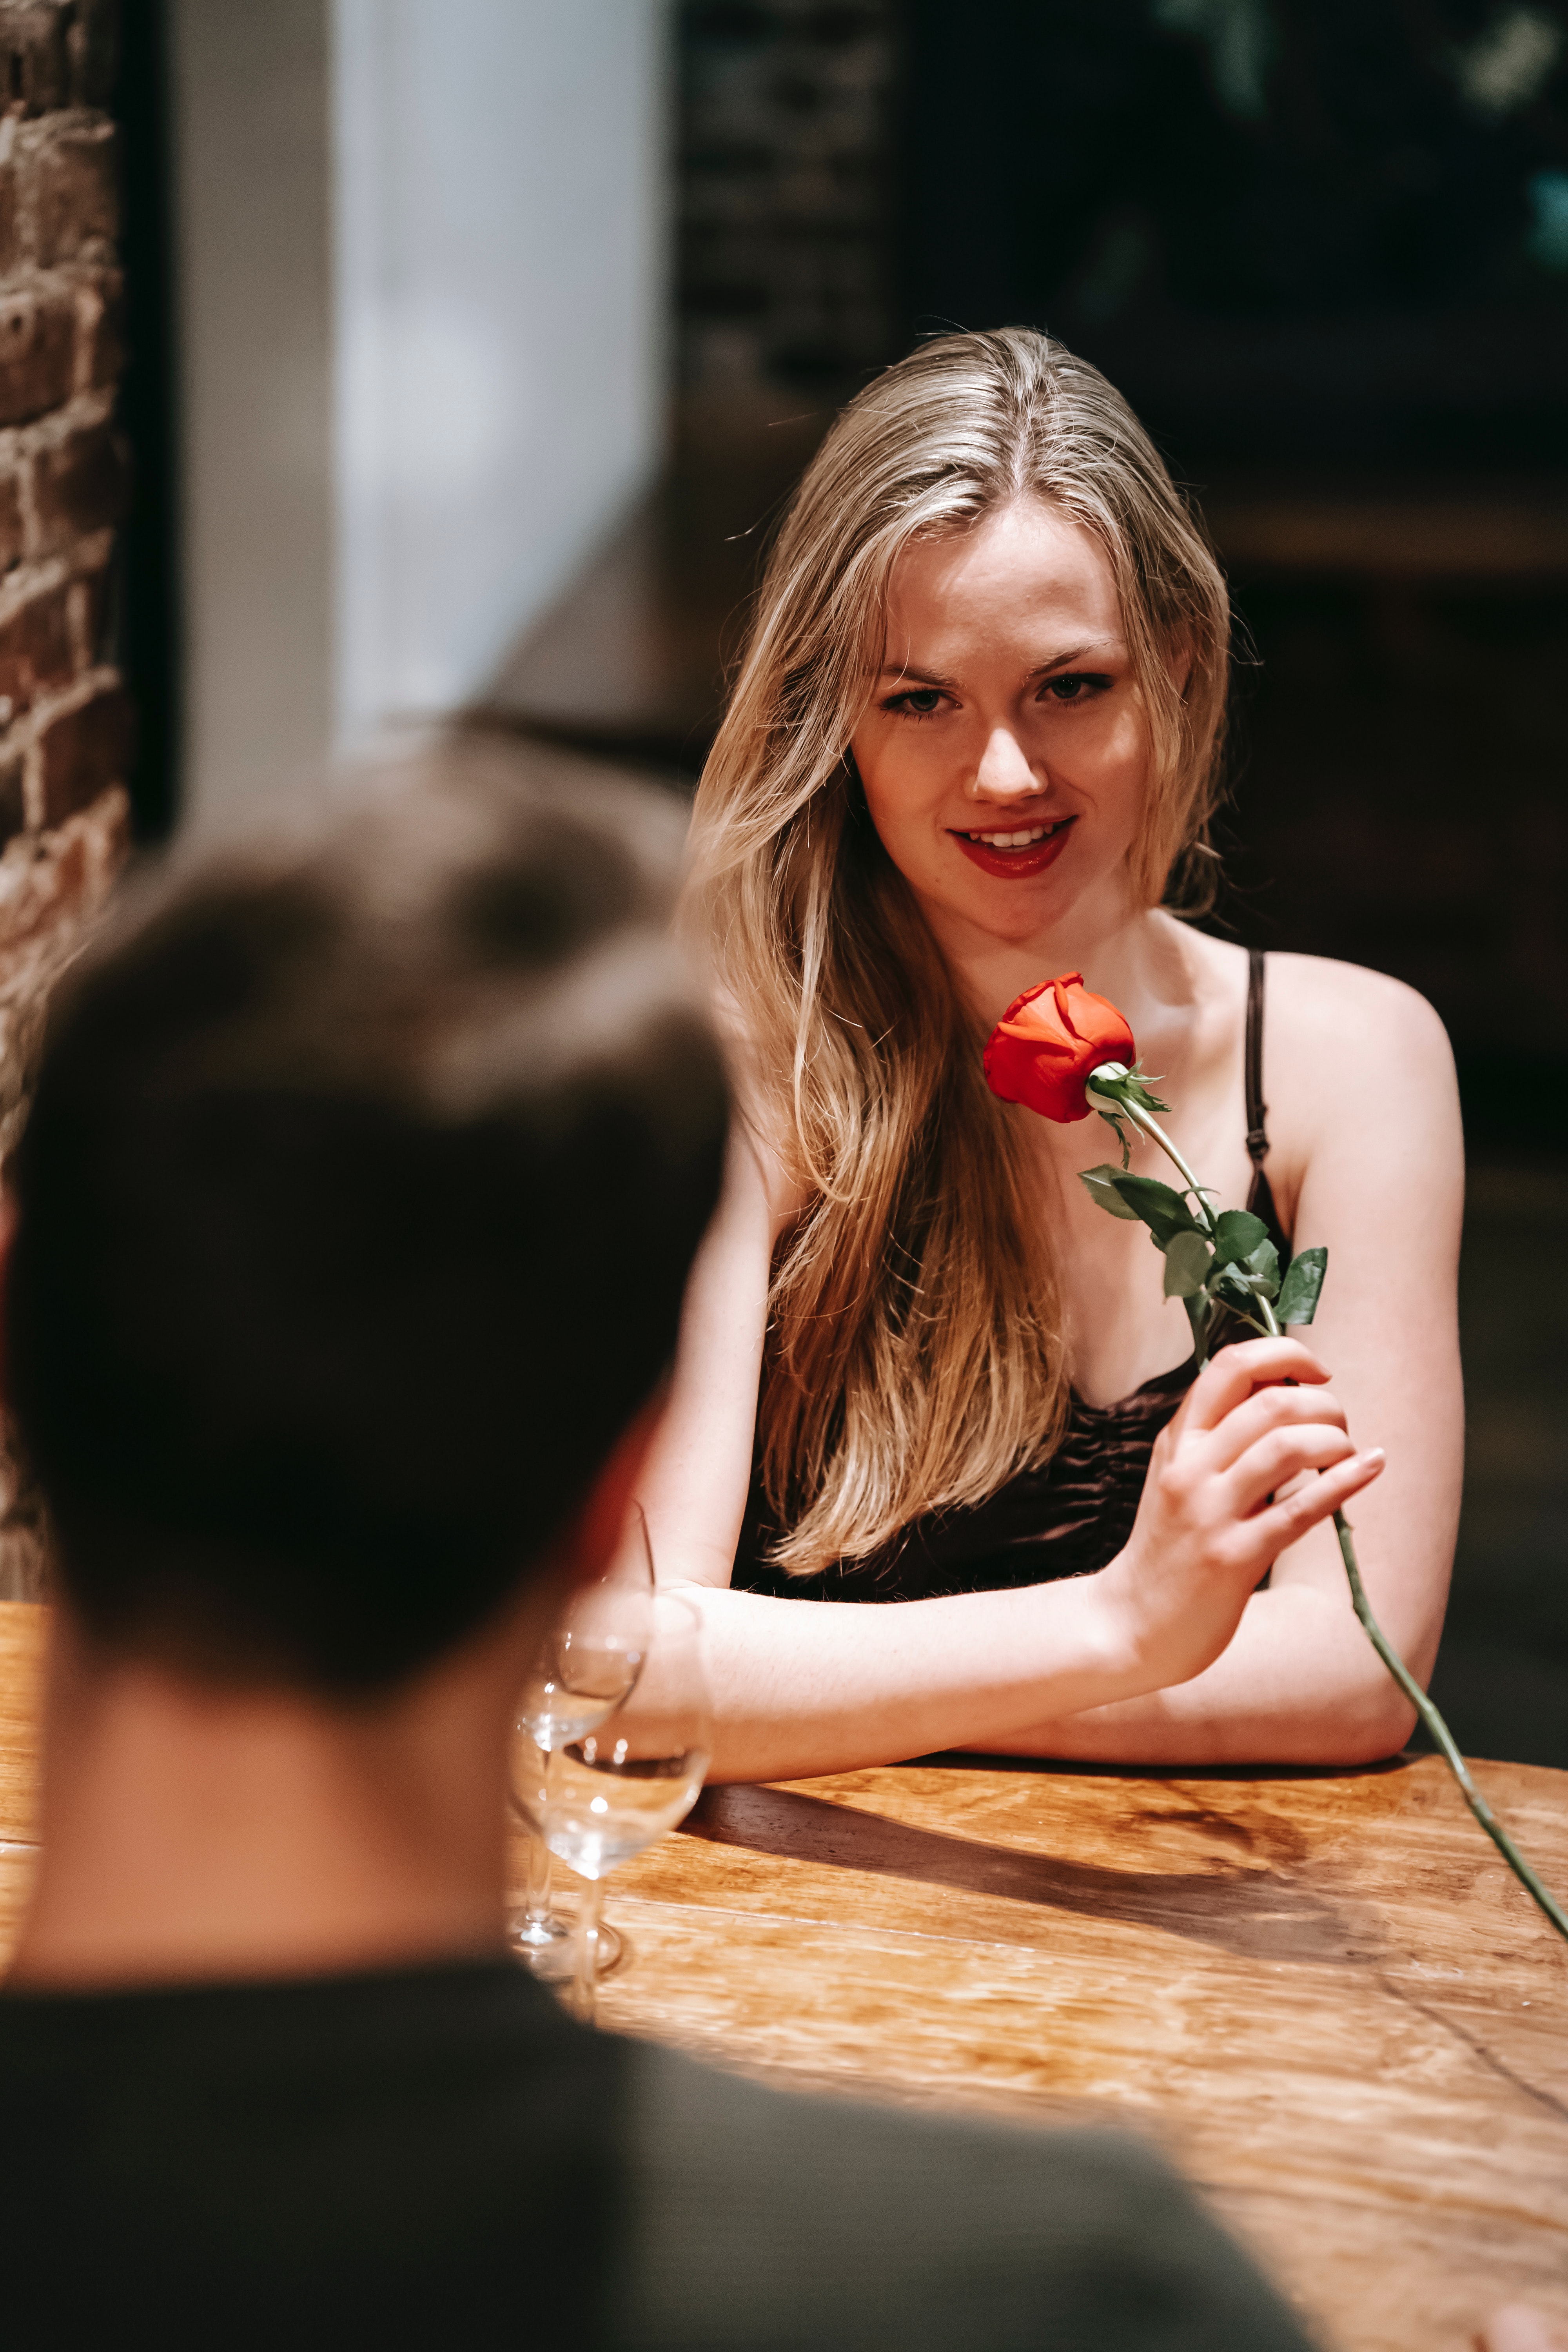 A woman holding a red rose on a date. | Source: Unsplash